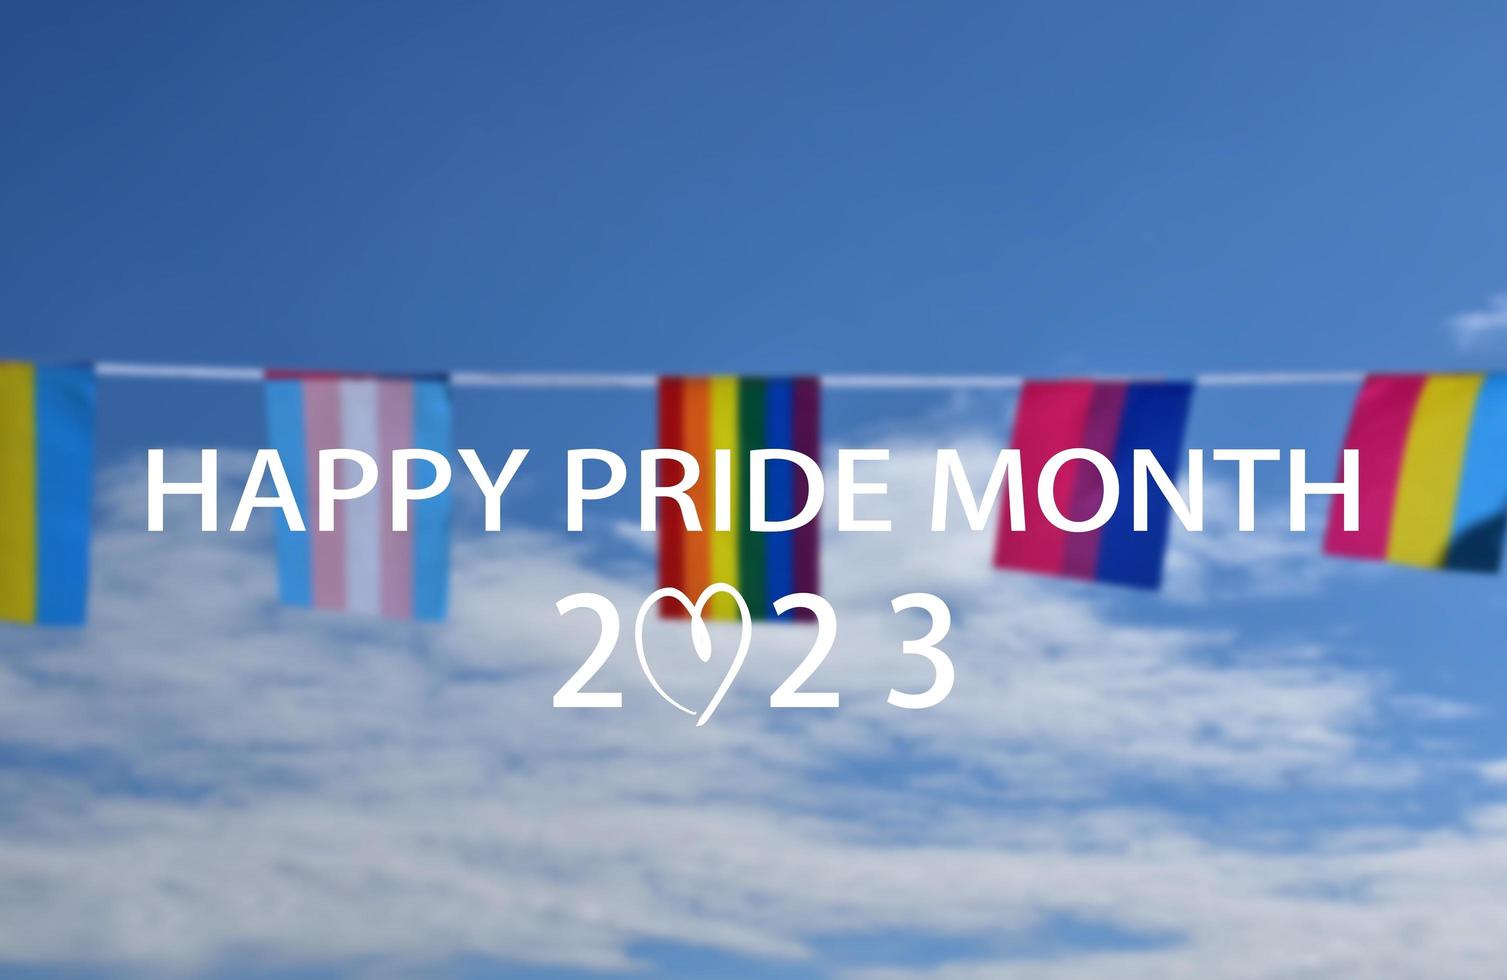 'Happy Pride Month' on bluesky and rainbow flags holding in hand, sunset background, concept for lgbt celebrations in pride month, june, around the world. photo